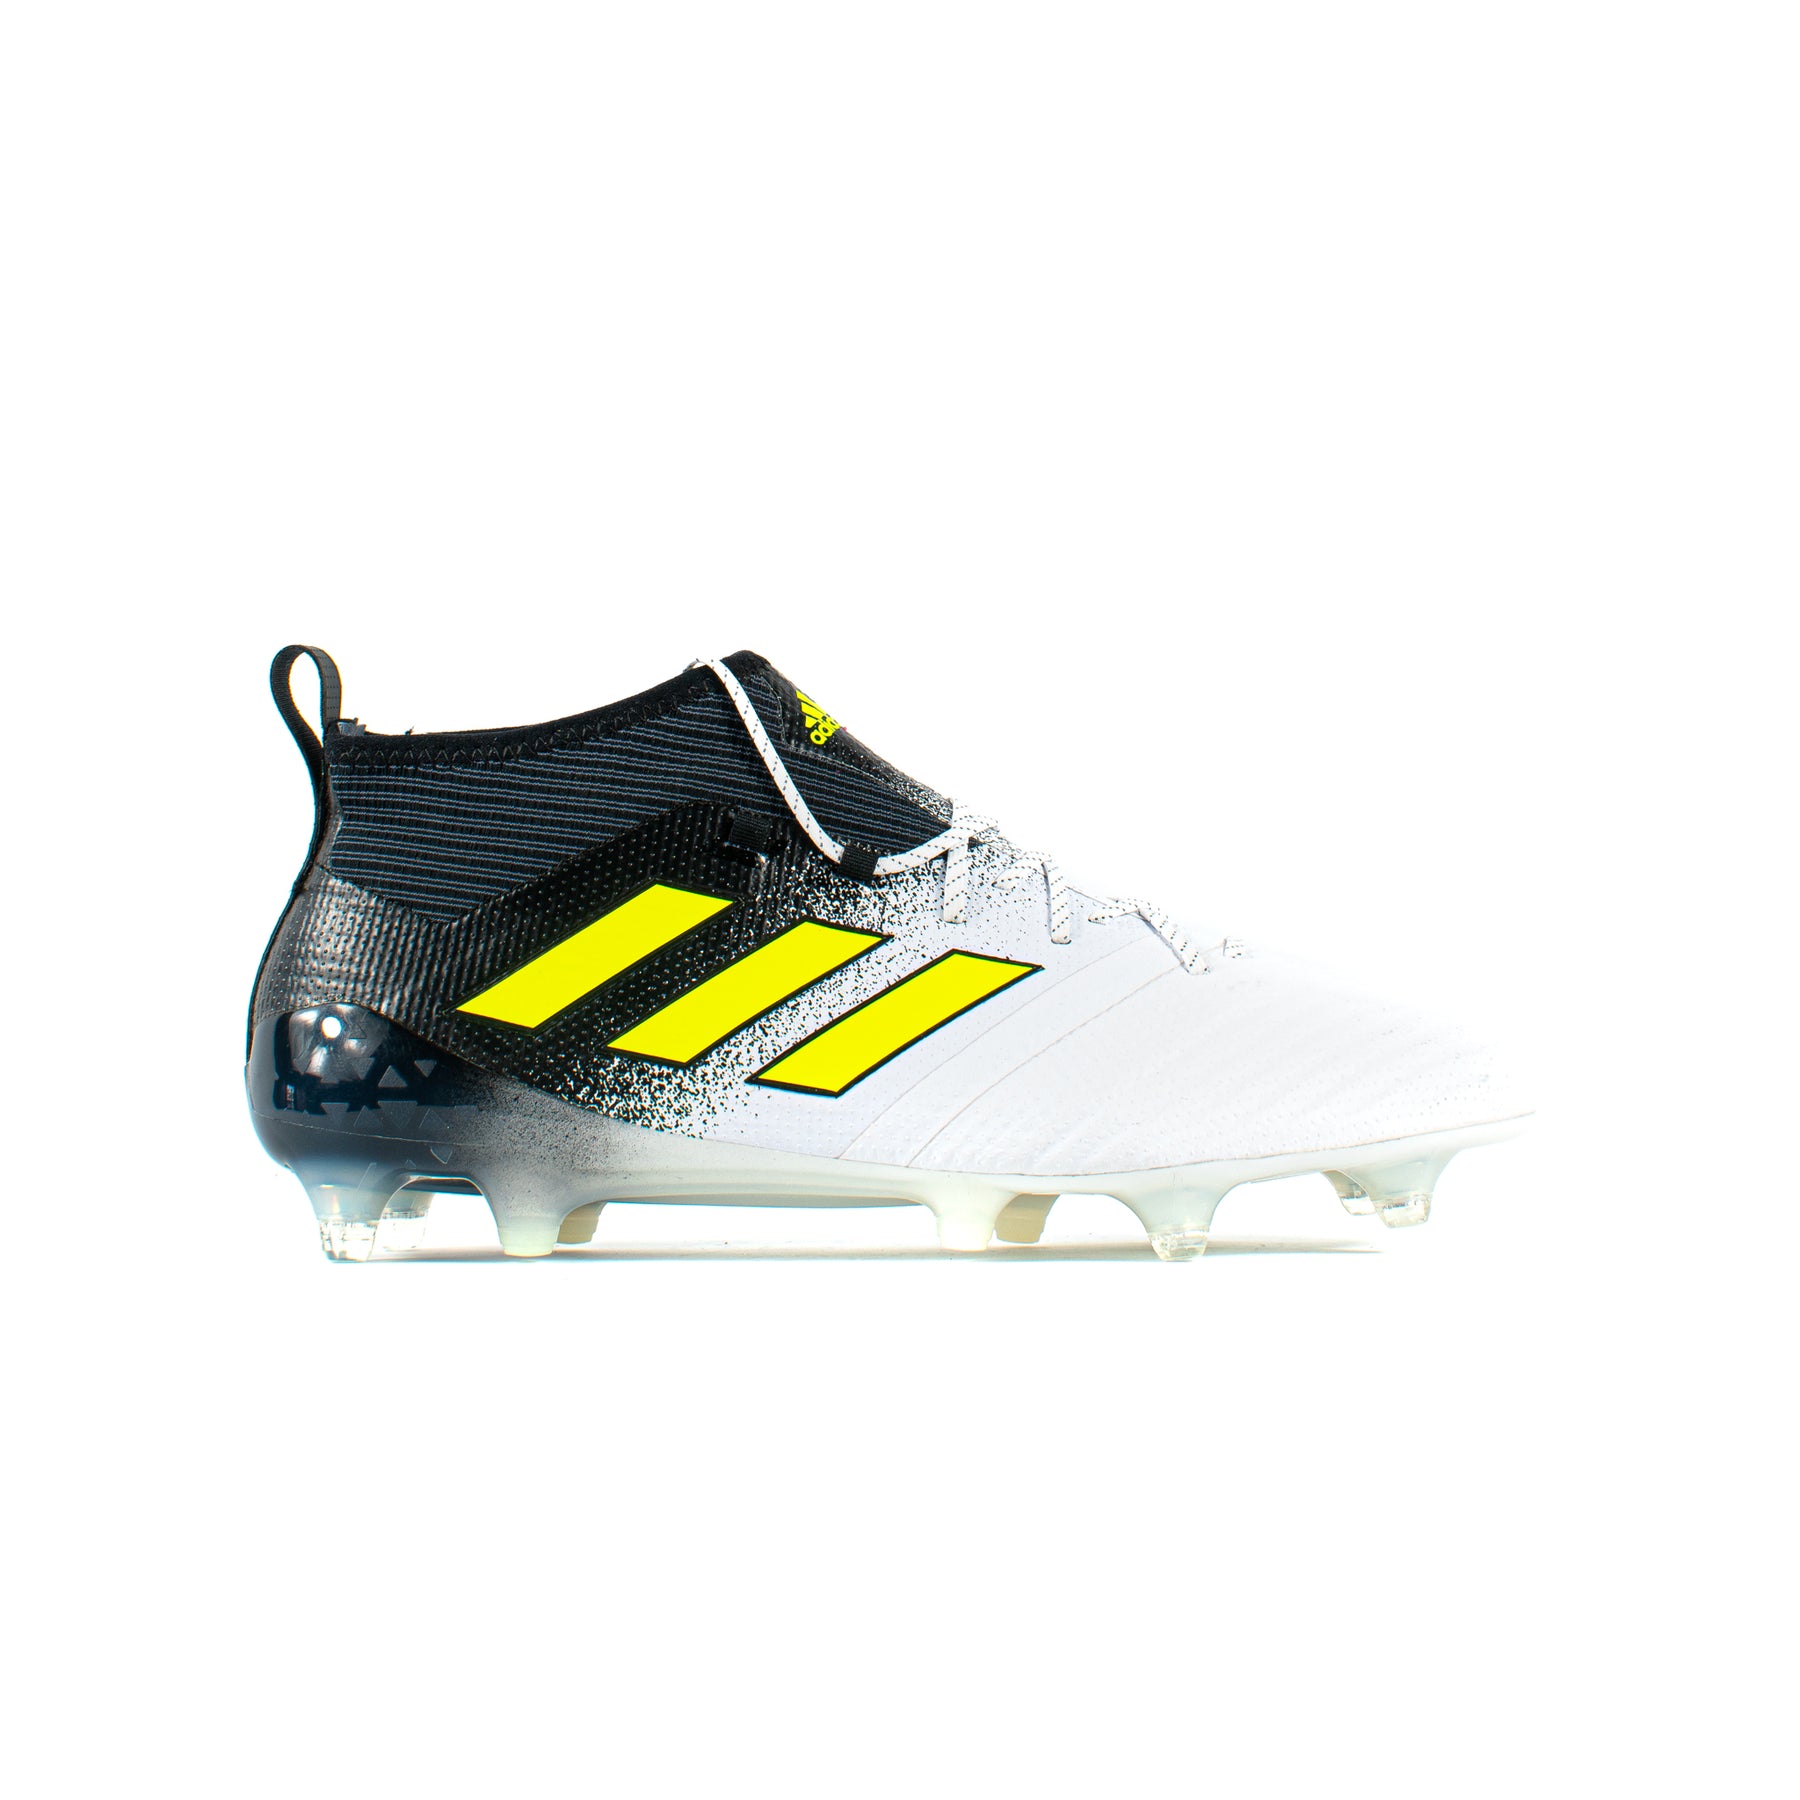 Adidas Ace 17.1 PureControl White SG/FG – Classic Soccer Cleats